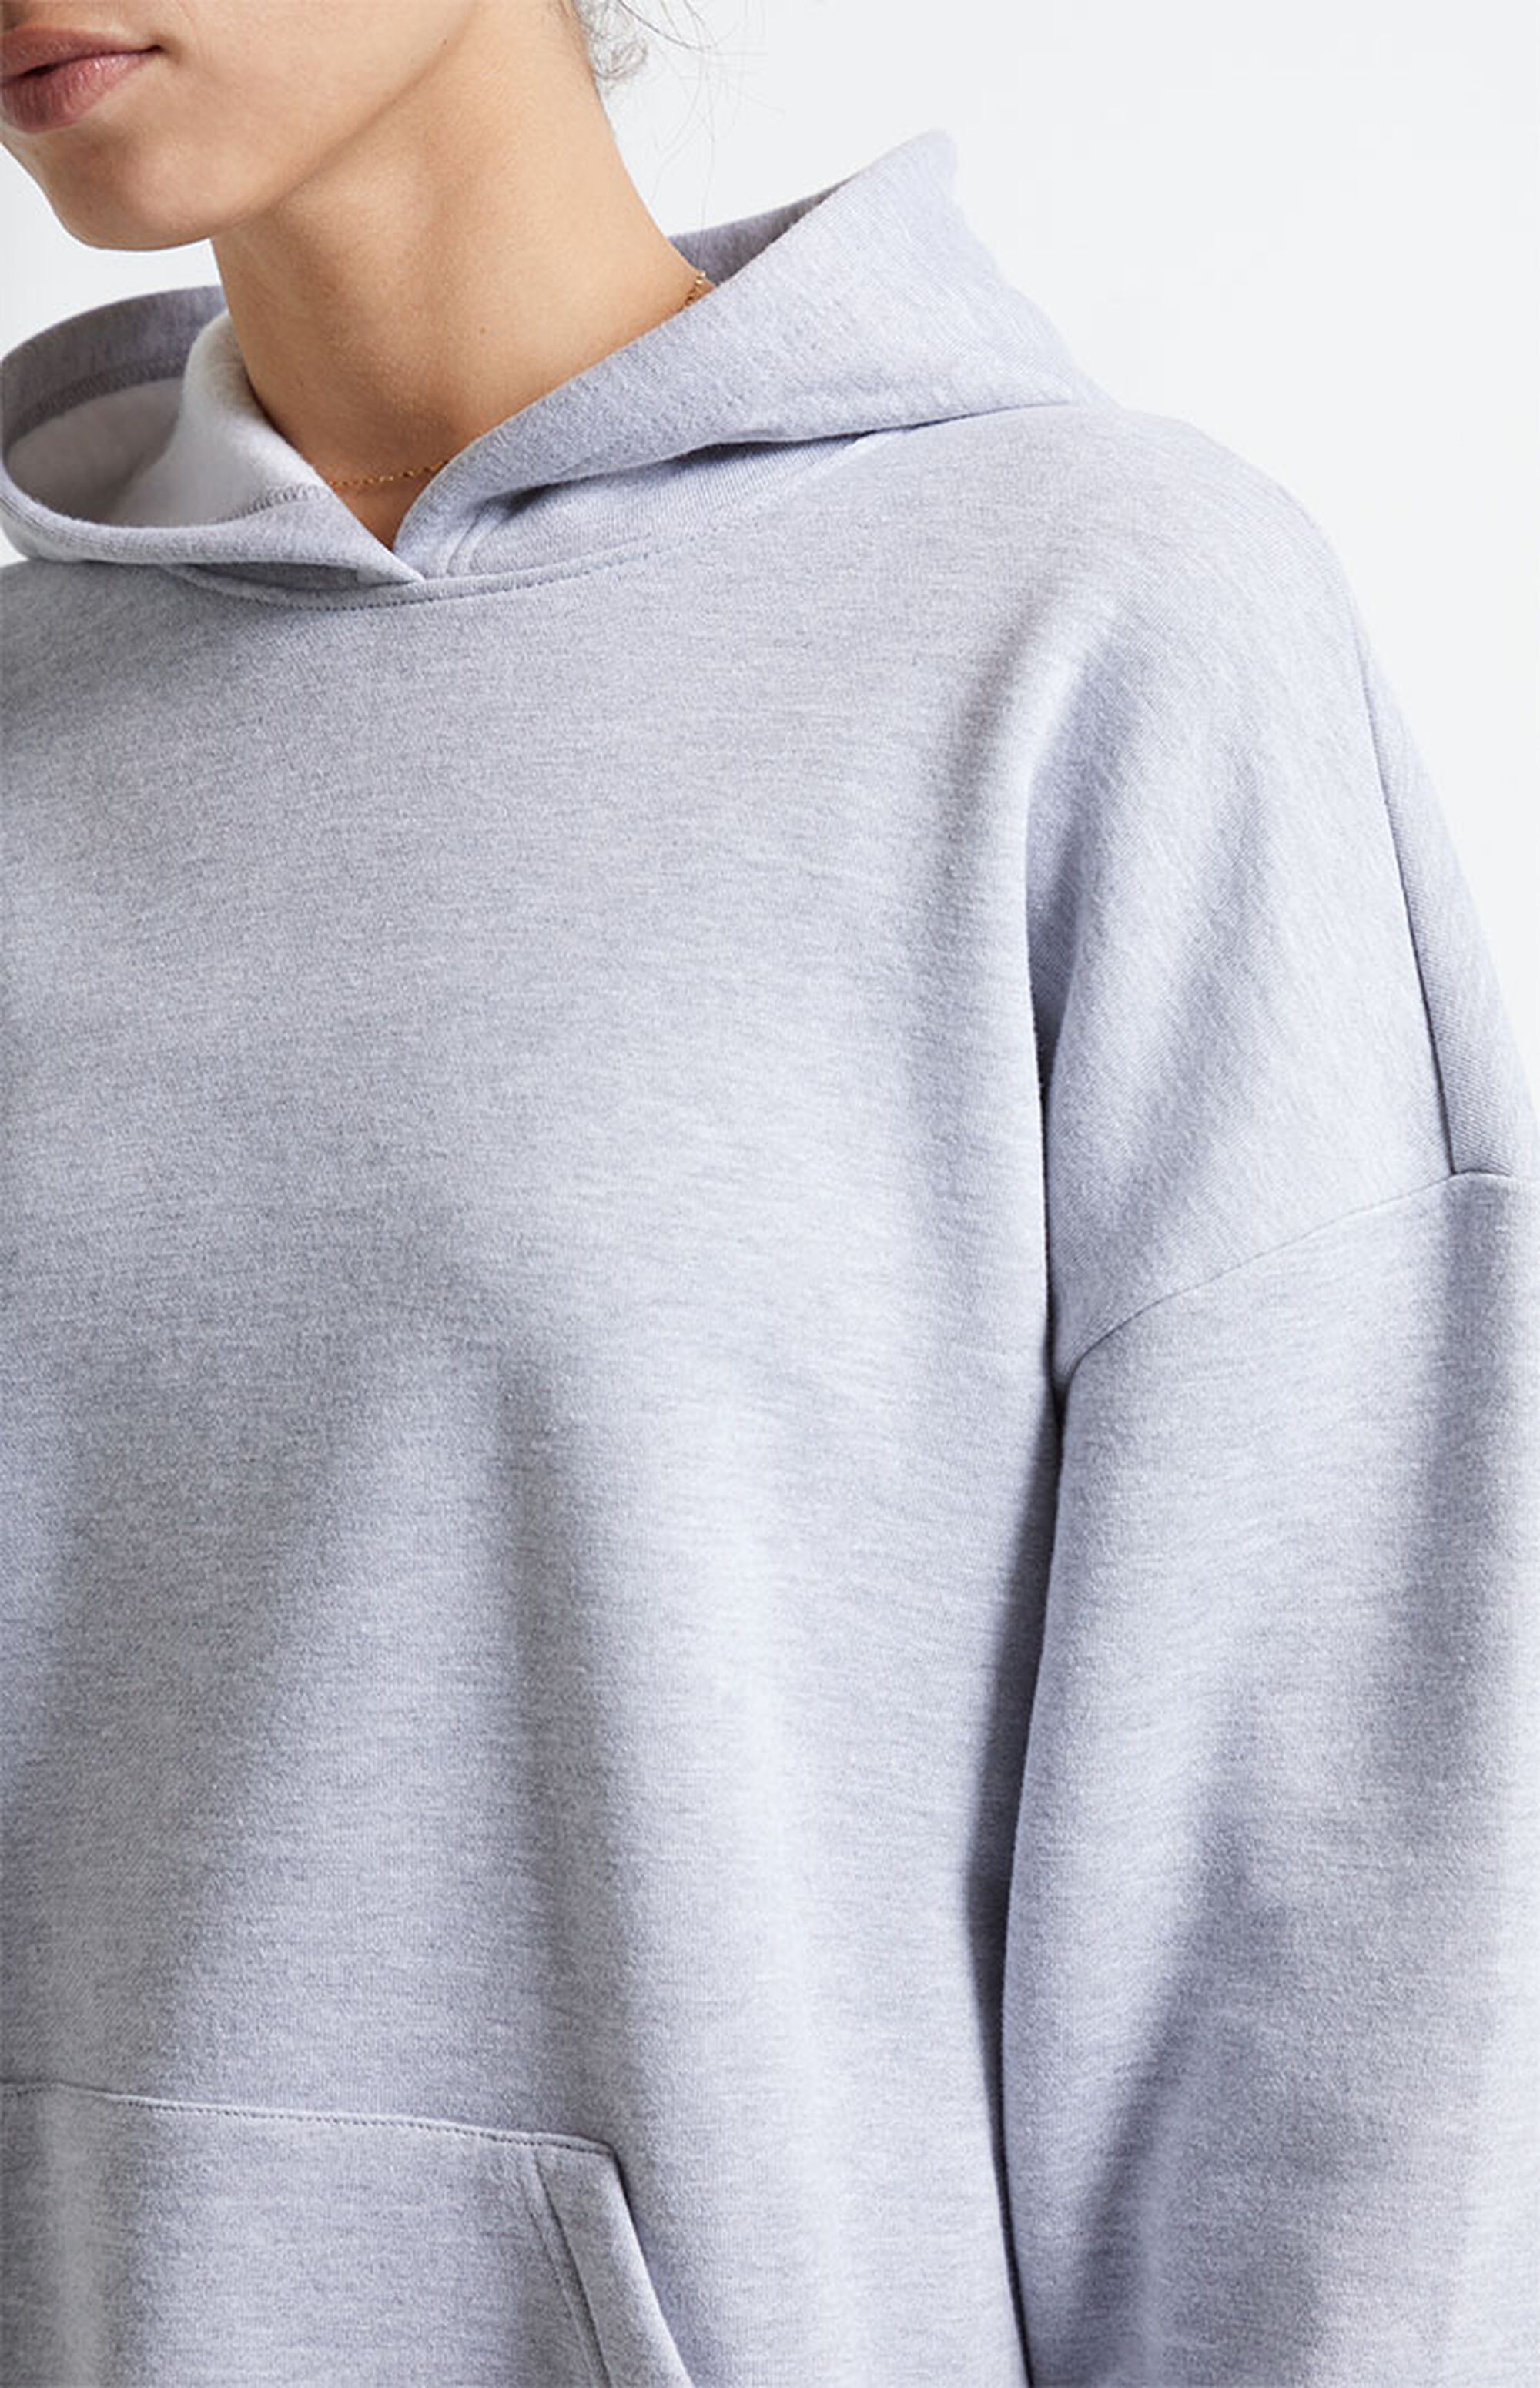 PacSun Oversized Classic Hoodie | PacSun